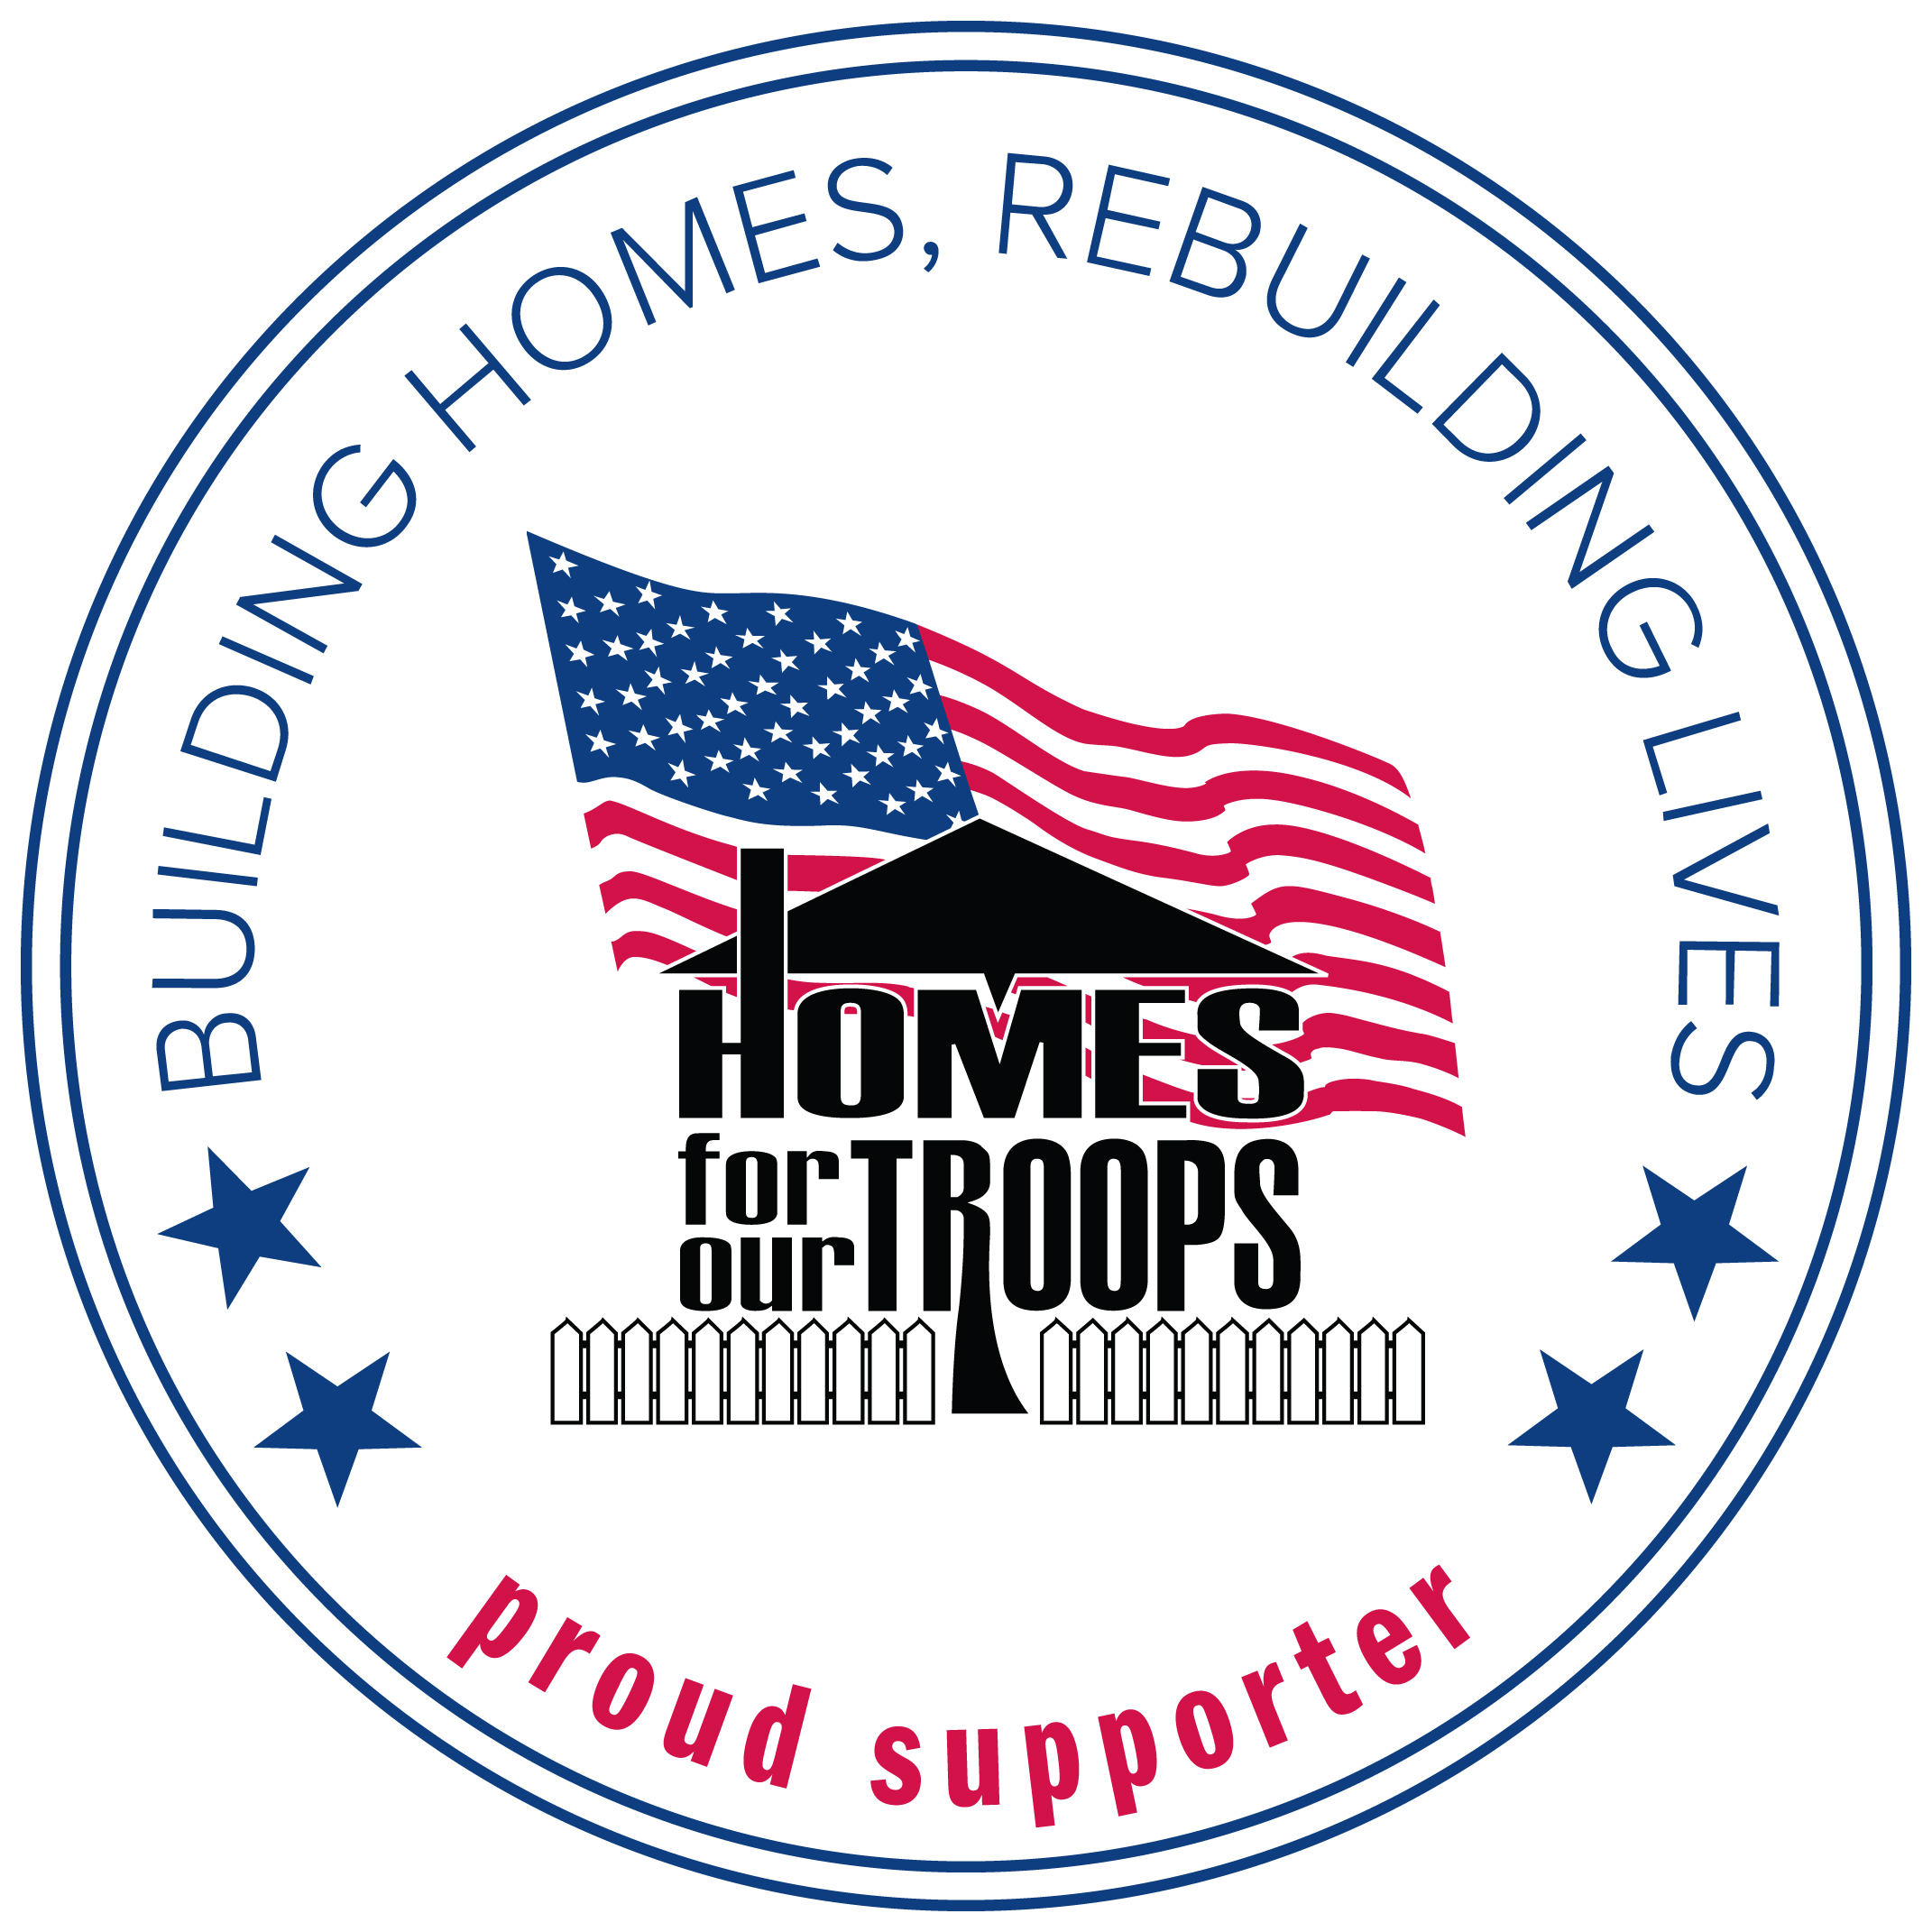 Blinds.com supports Homes for Our Troops